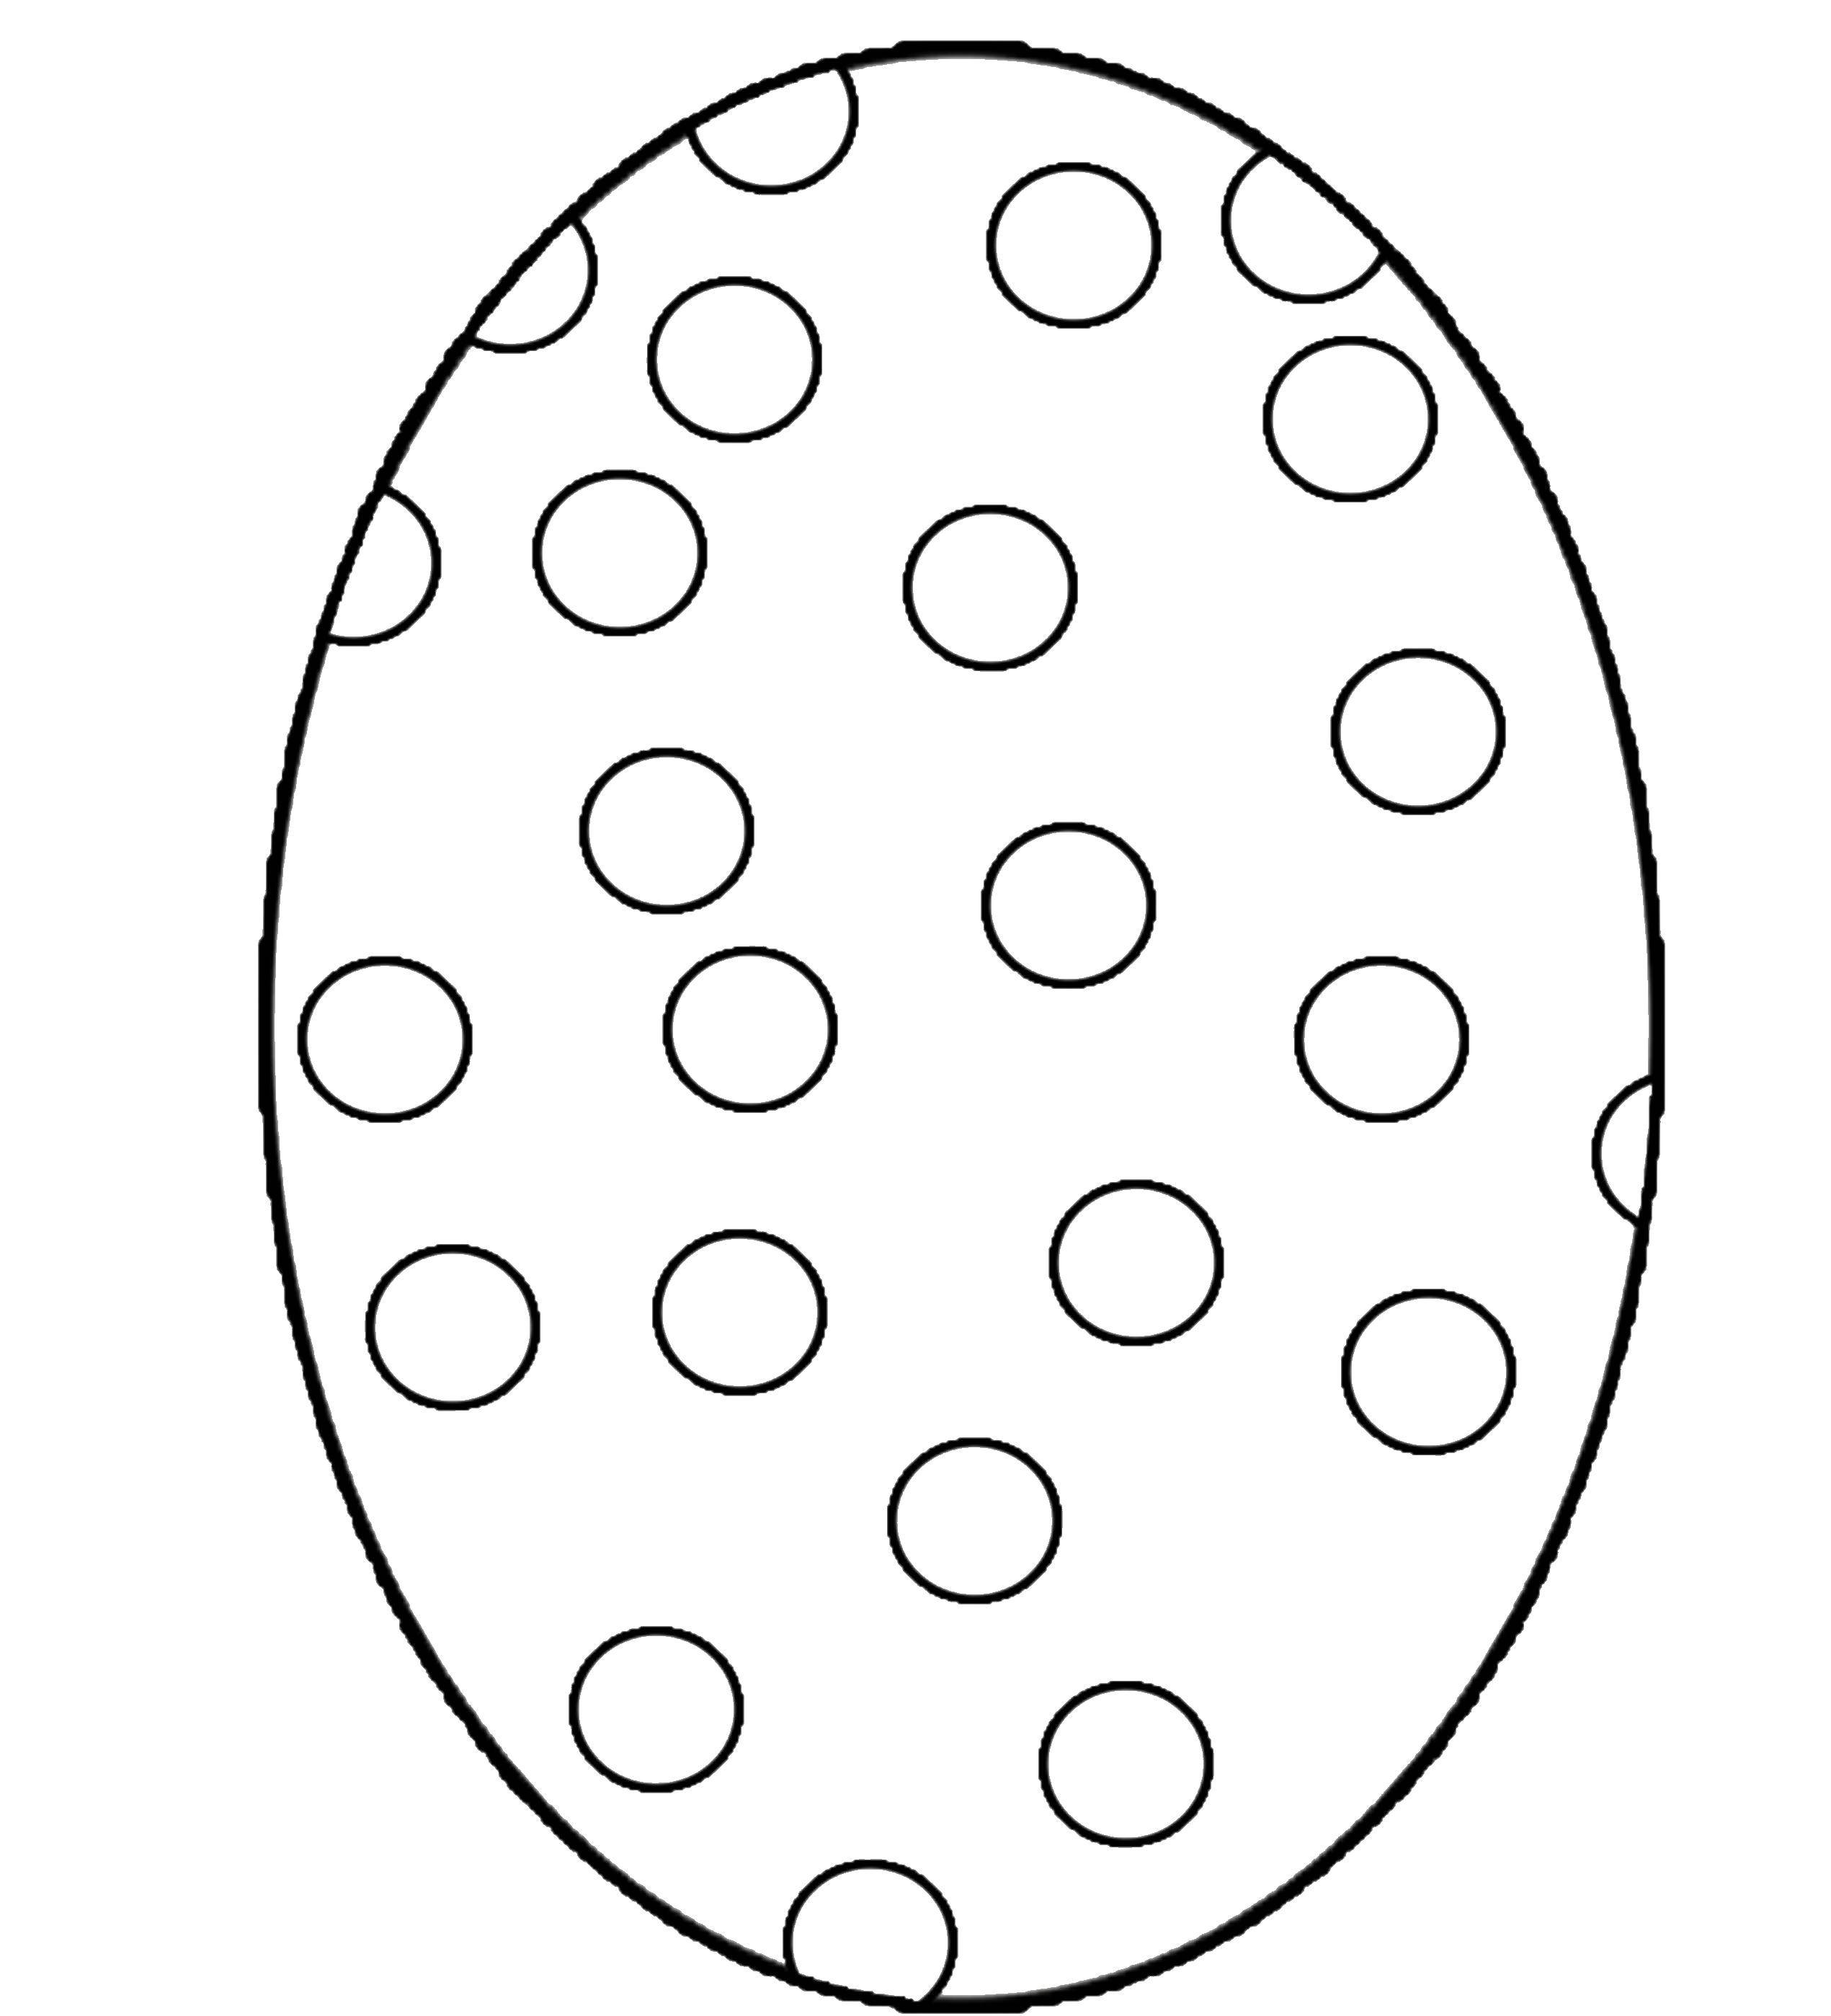 Coloring Egg slices. Category Patterns for coloring eggs. Tags:  patterns, circles.